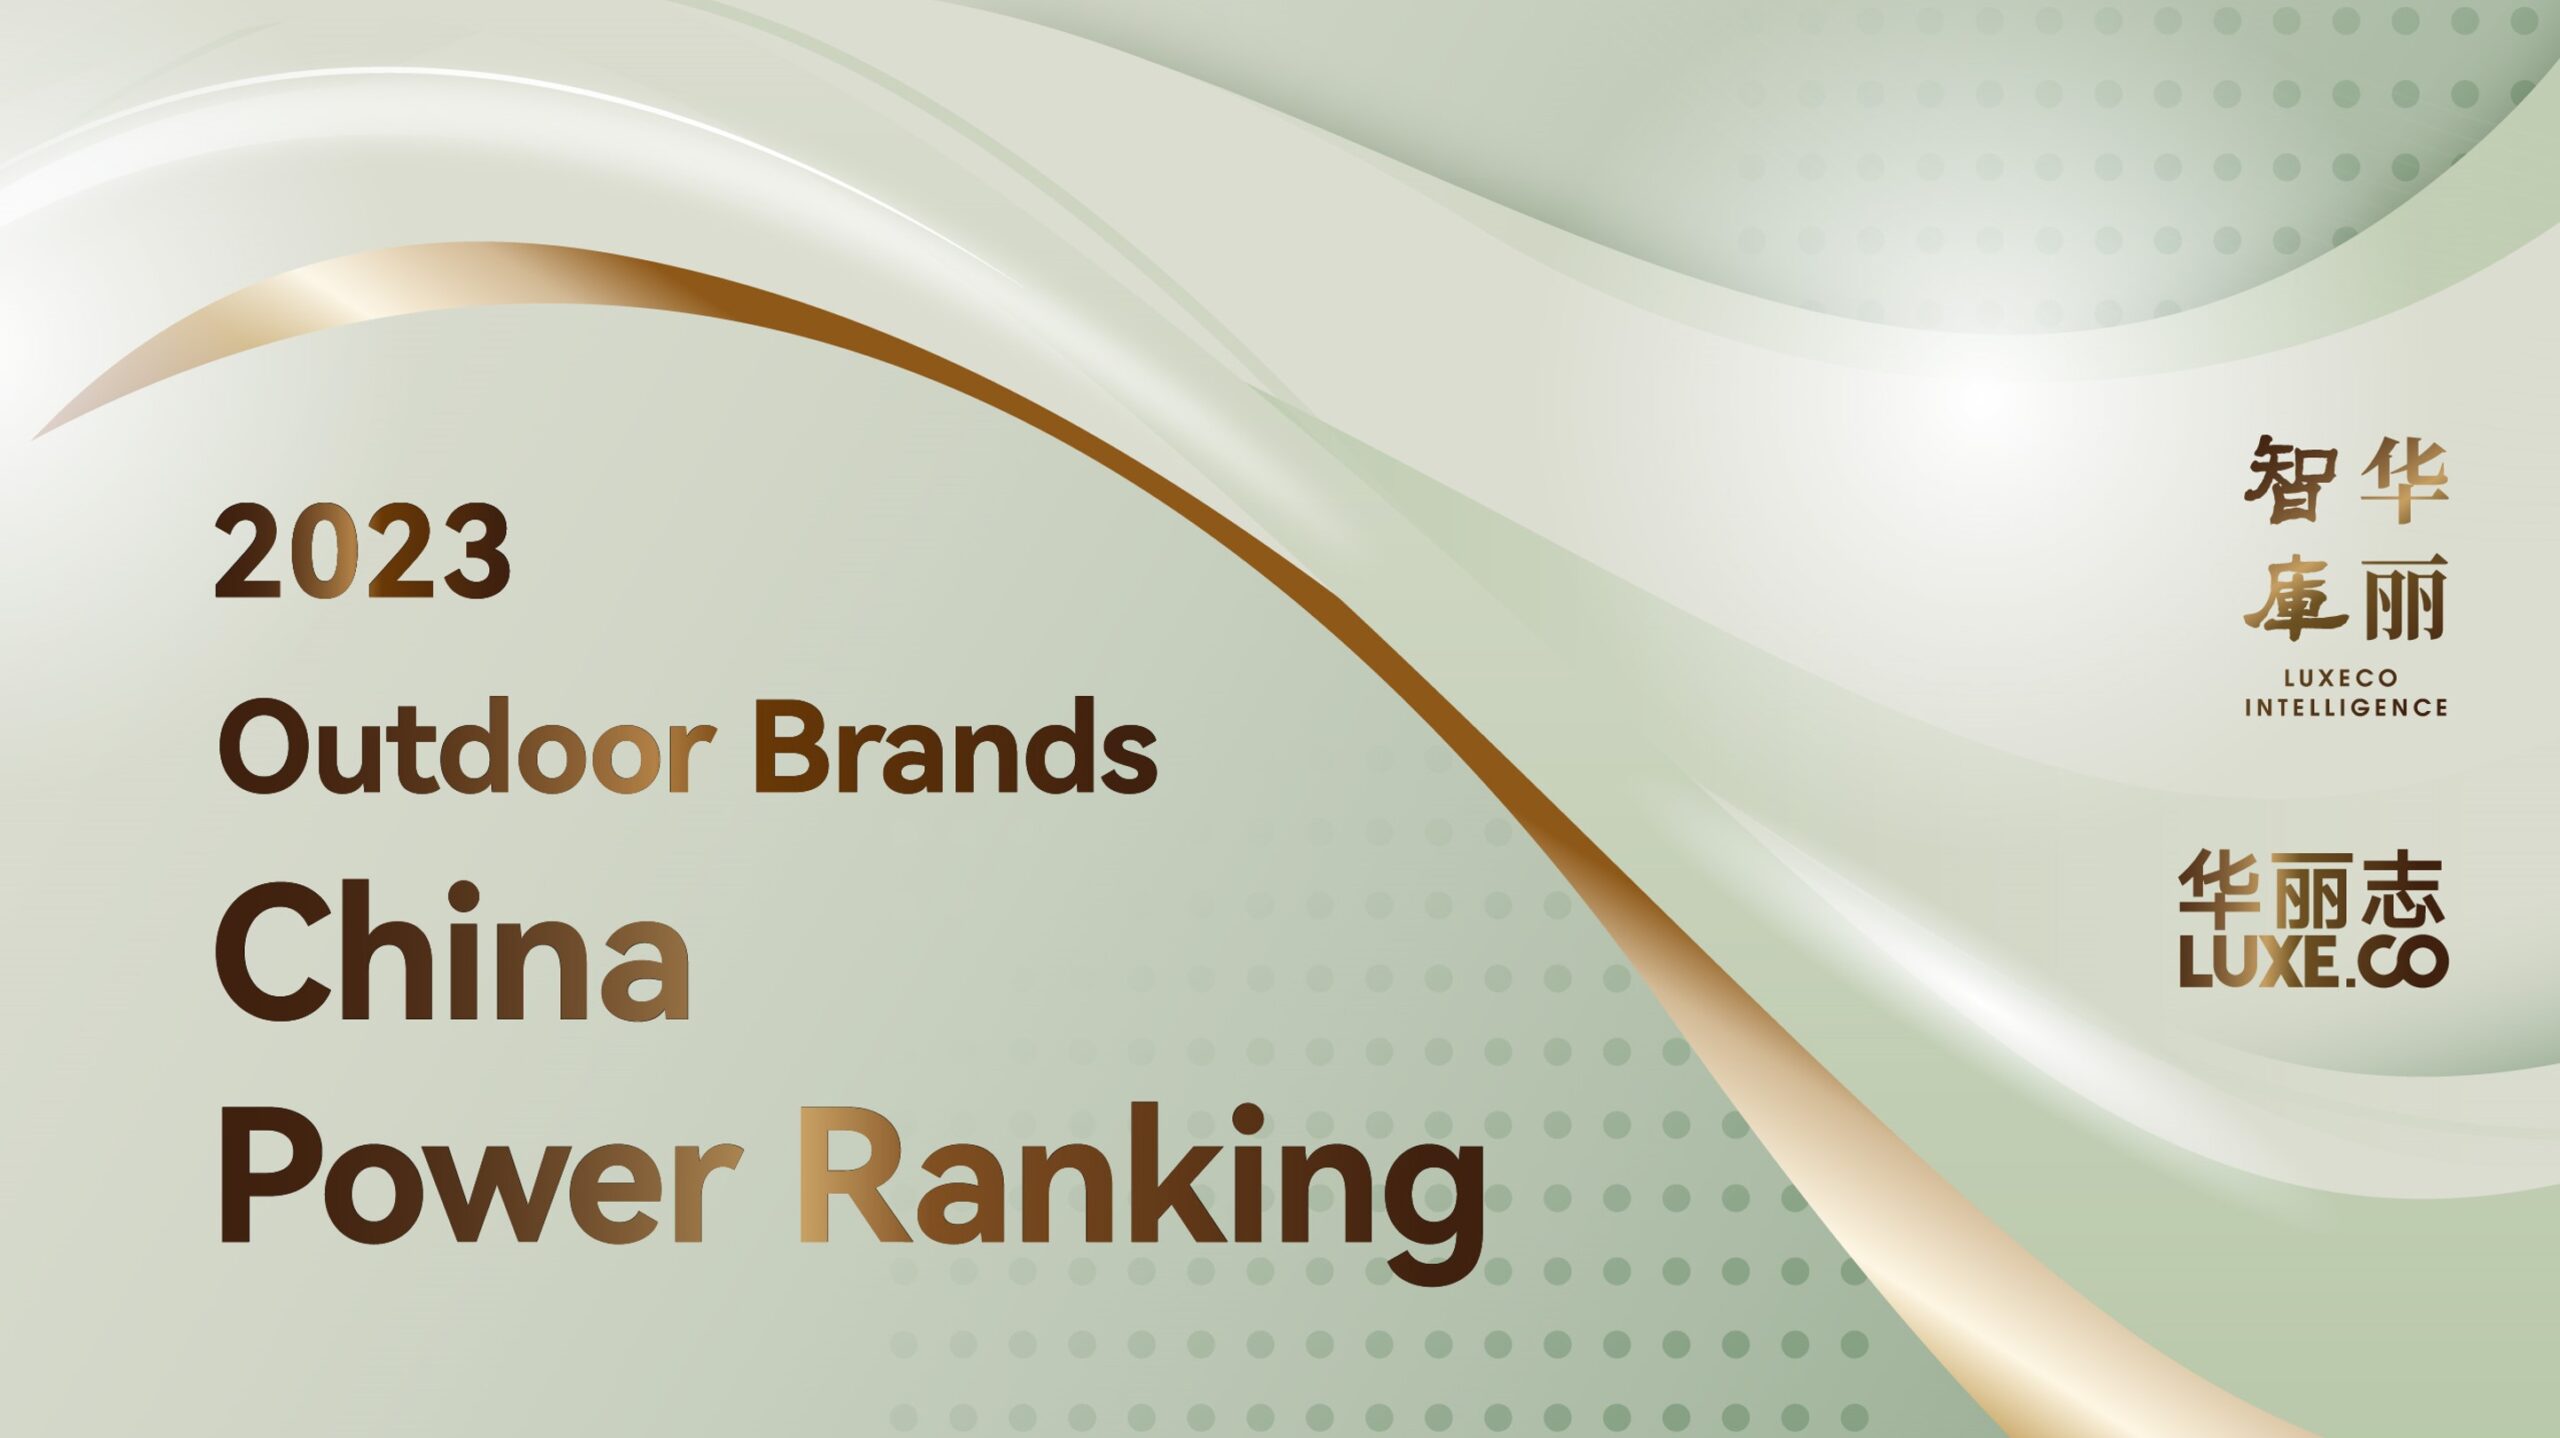 Exclusive | Luxe.CO Intelligence Releases “2023 Outdoor Brands China Power Ranking”